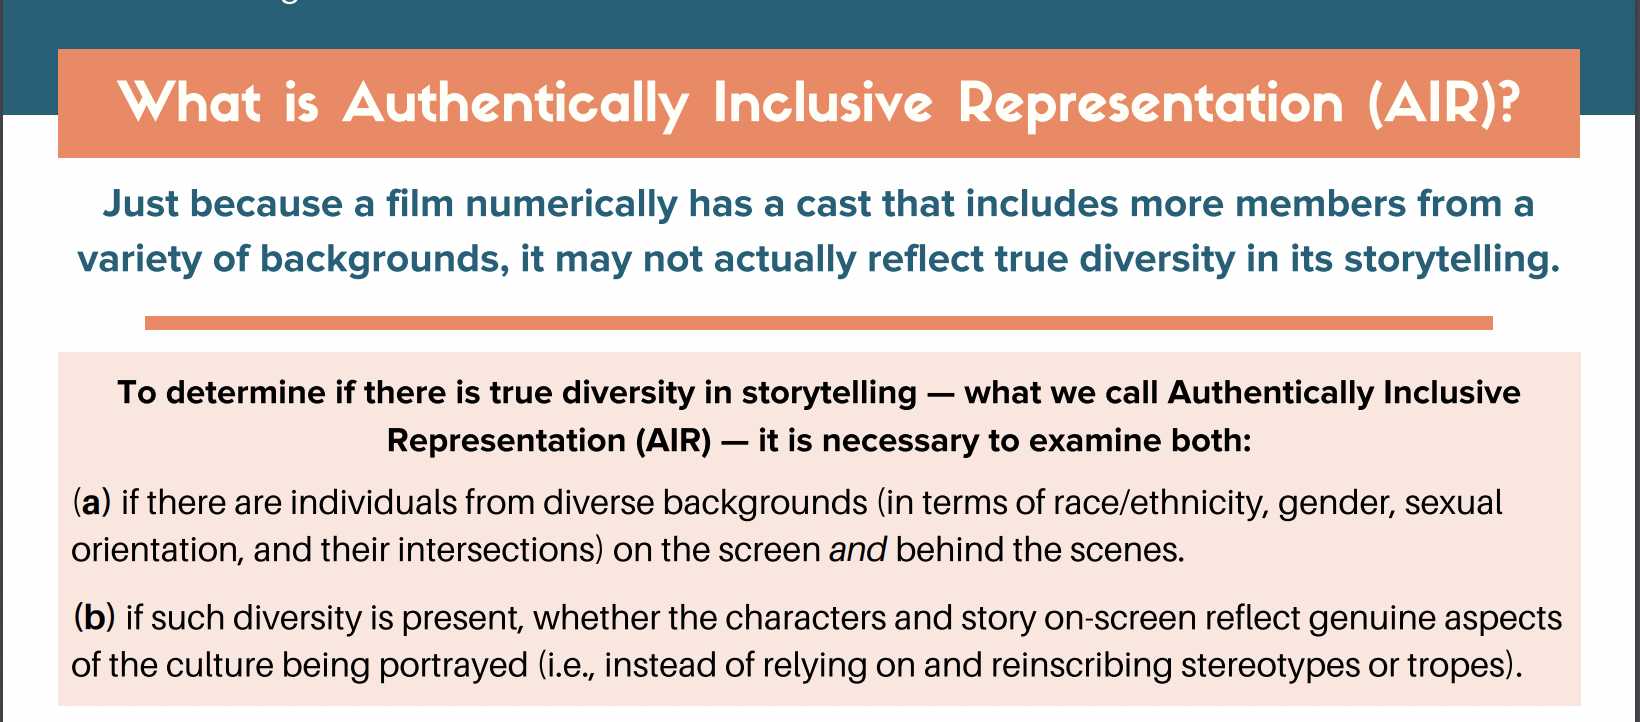 Graphic titled 'What is Authentically Inclusive Representation (AIR)?